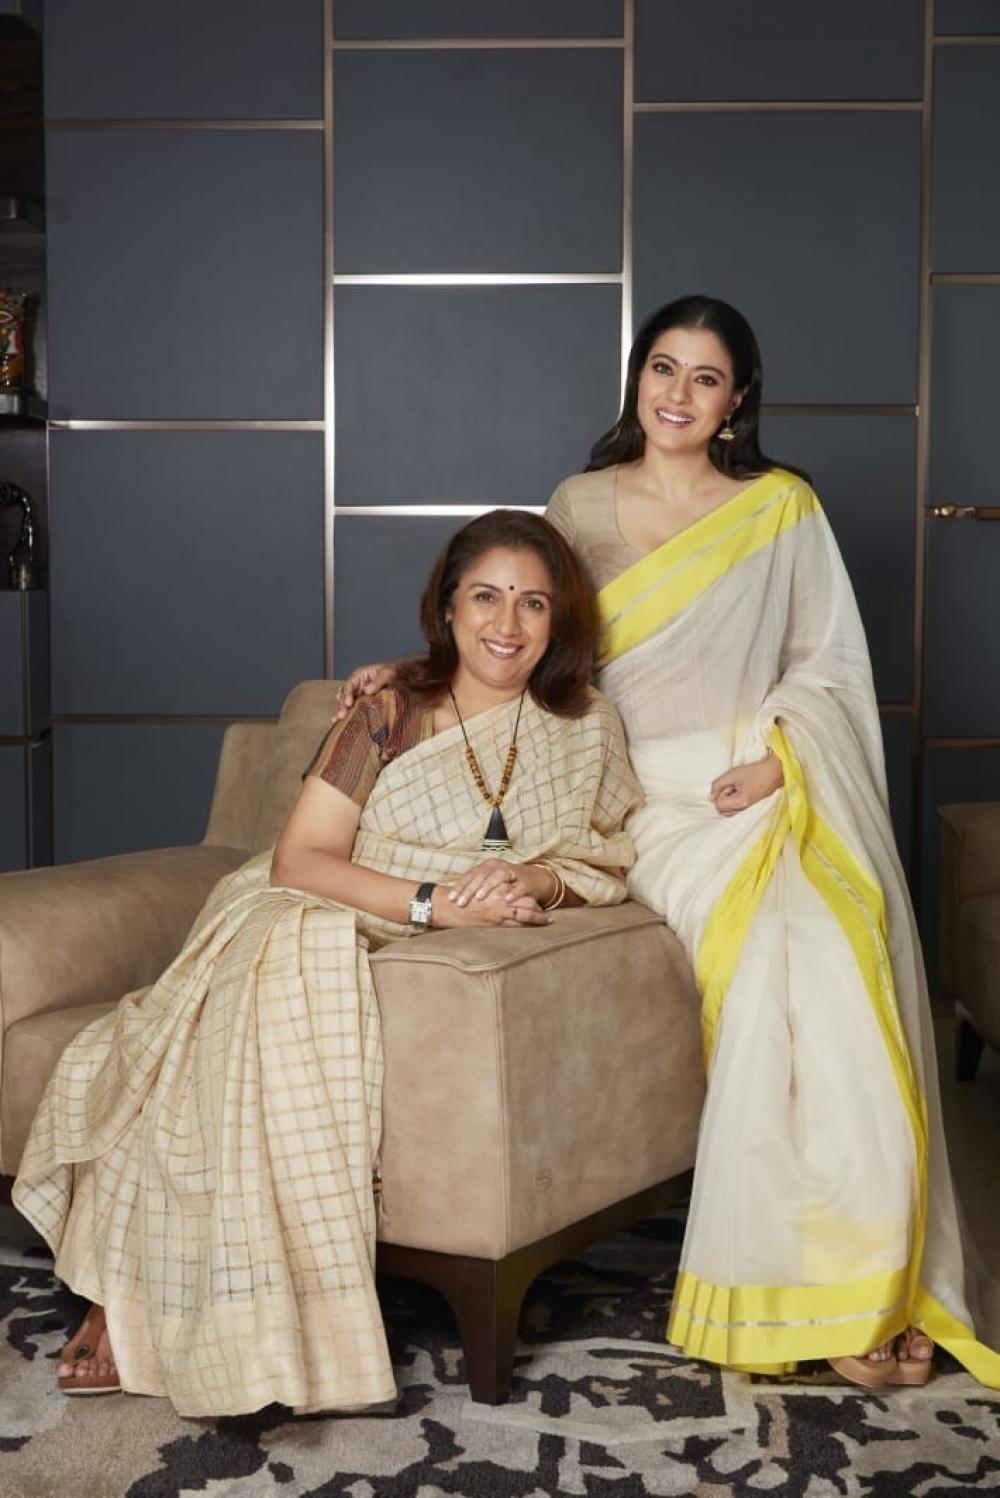 The Weekend Leader - Kajol, Revathy collaborate for film titled 'The Last Hurrah'